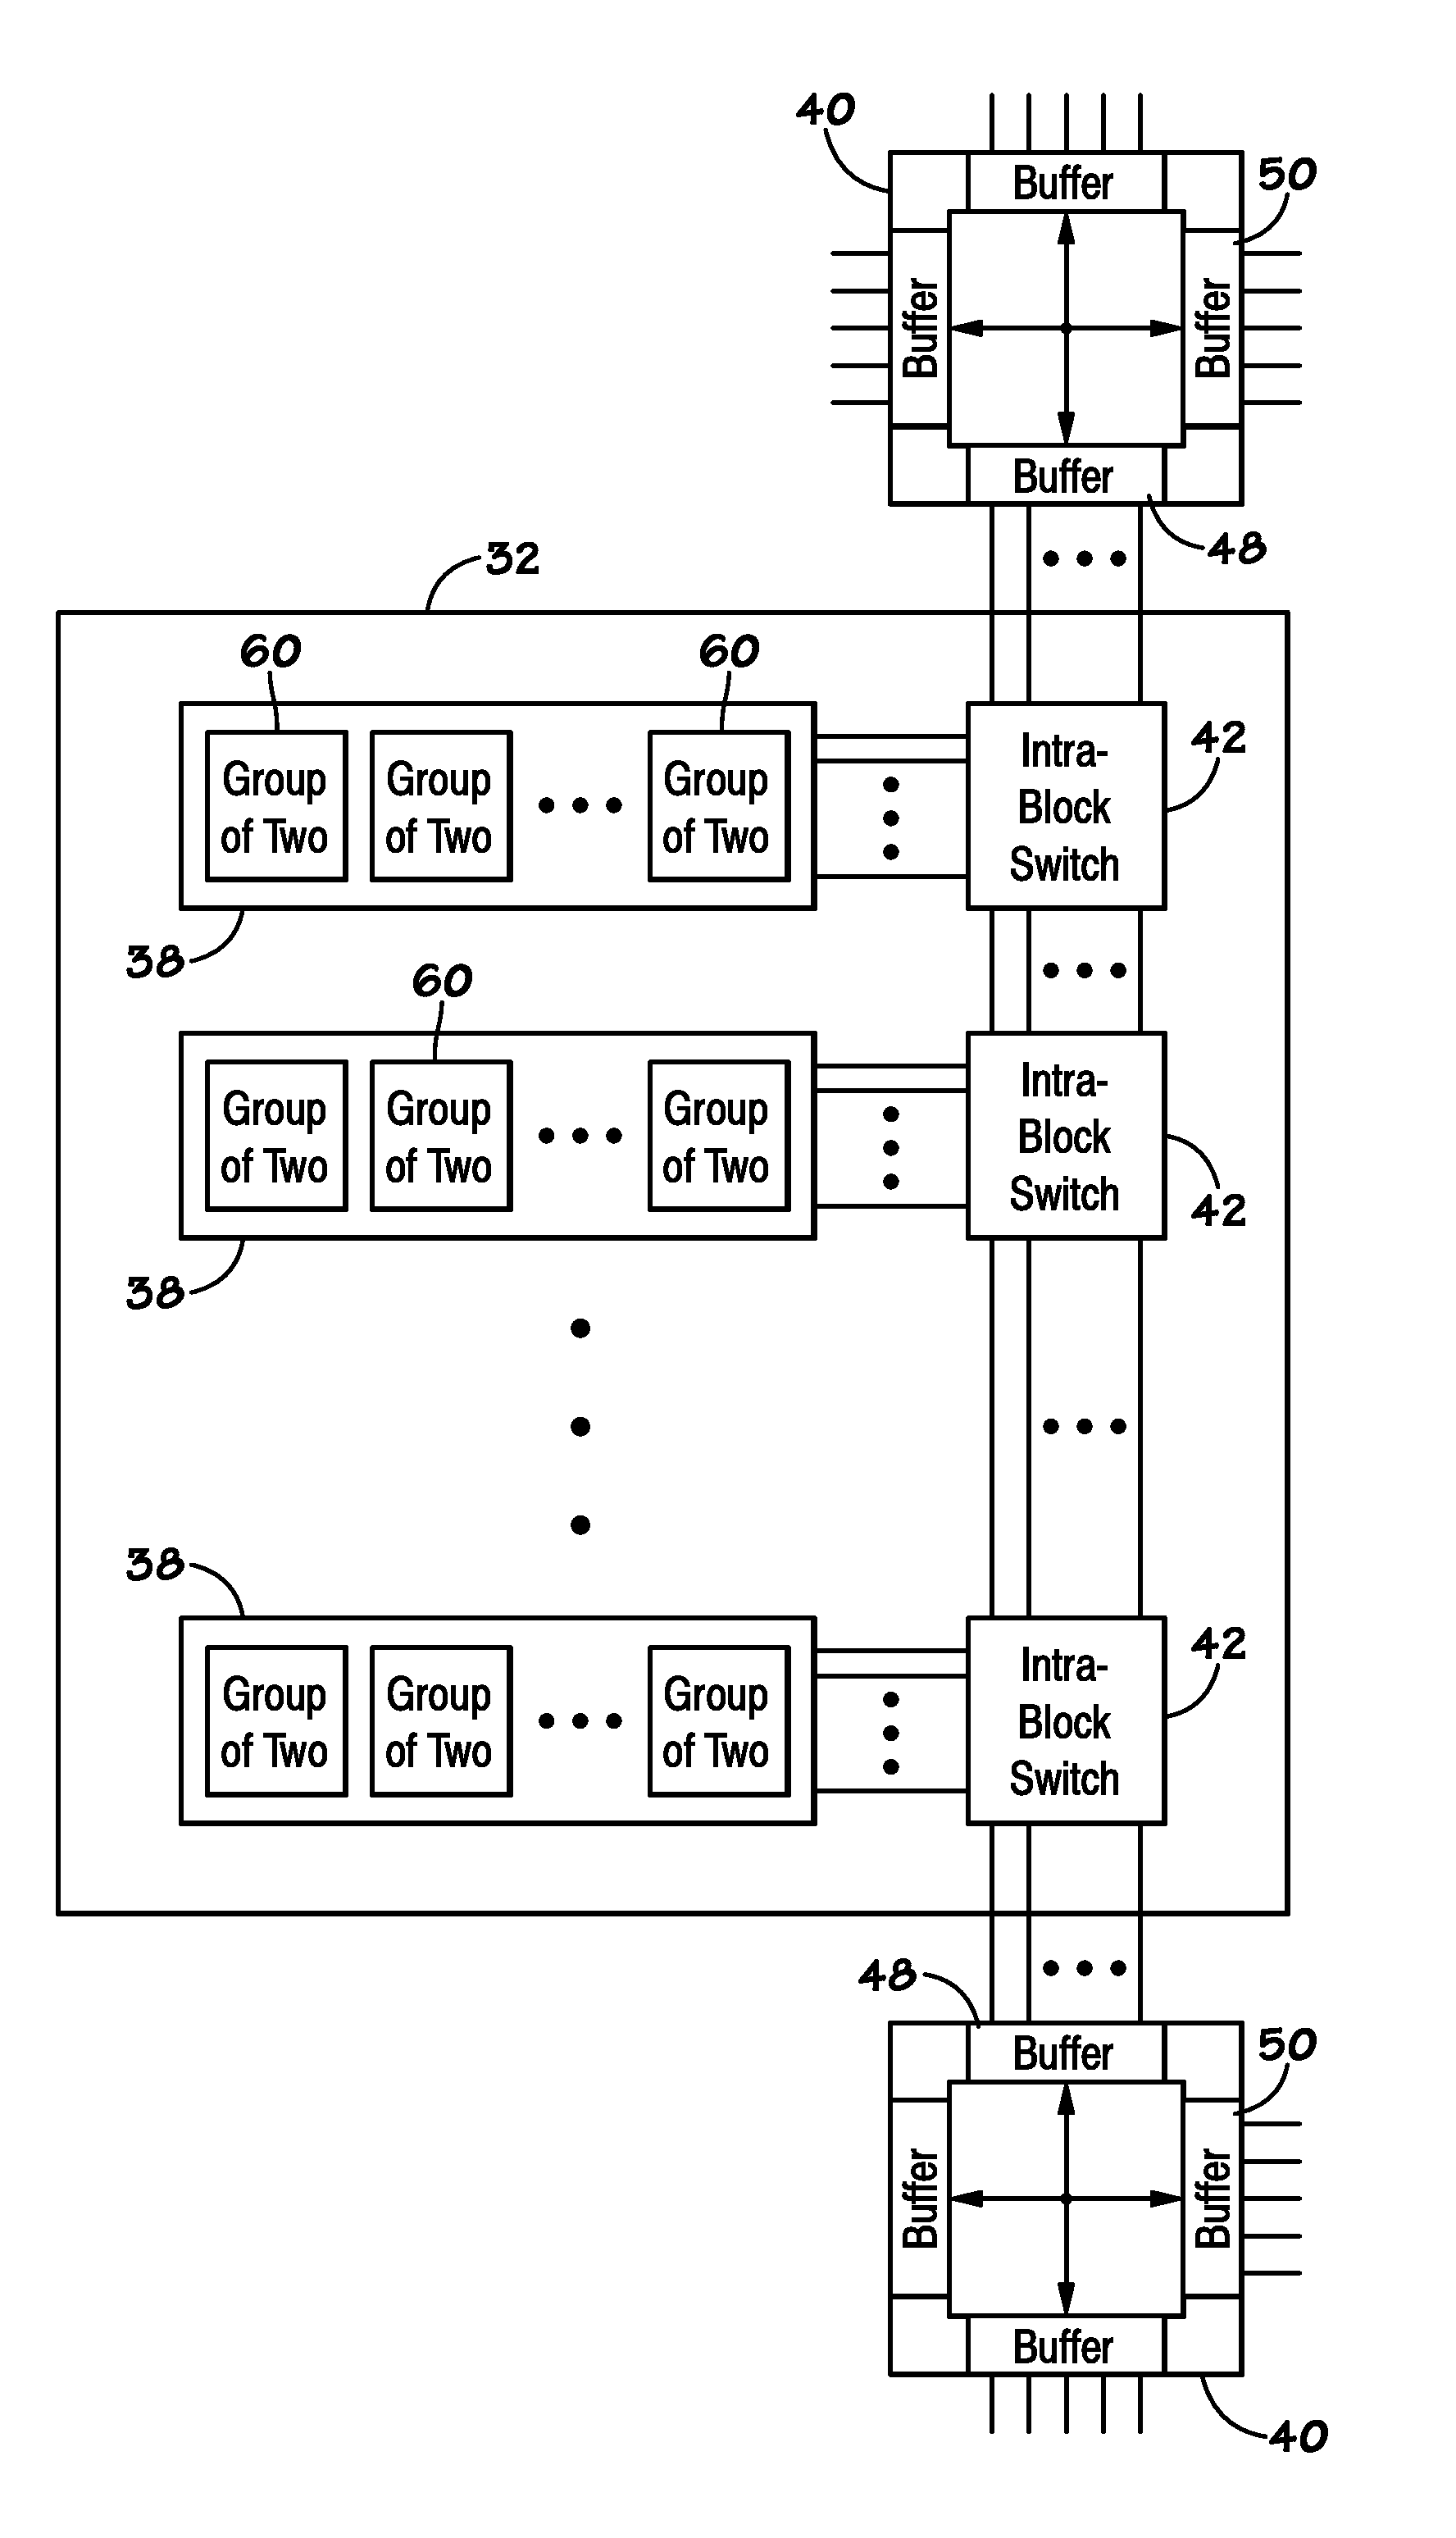 Methods and systems for handling data received by a state machine engine